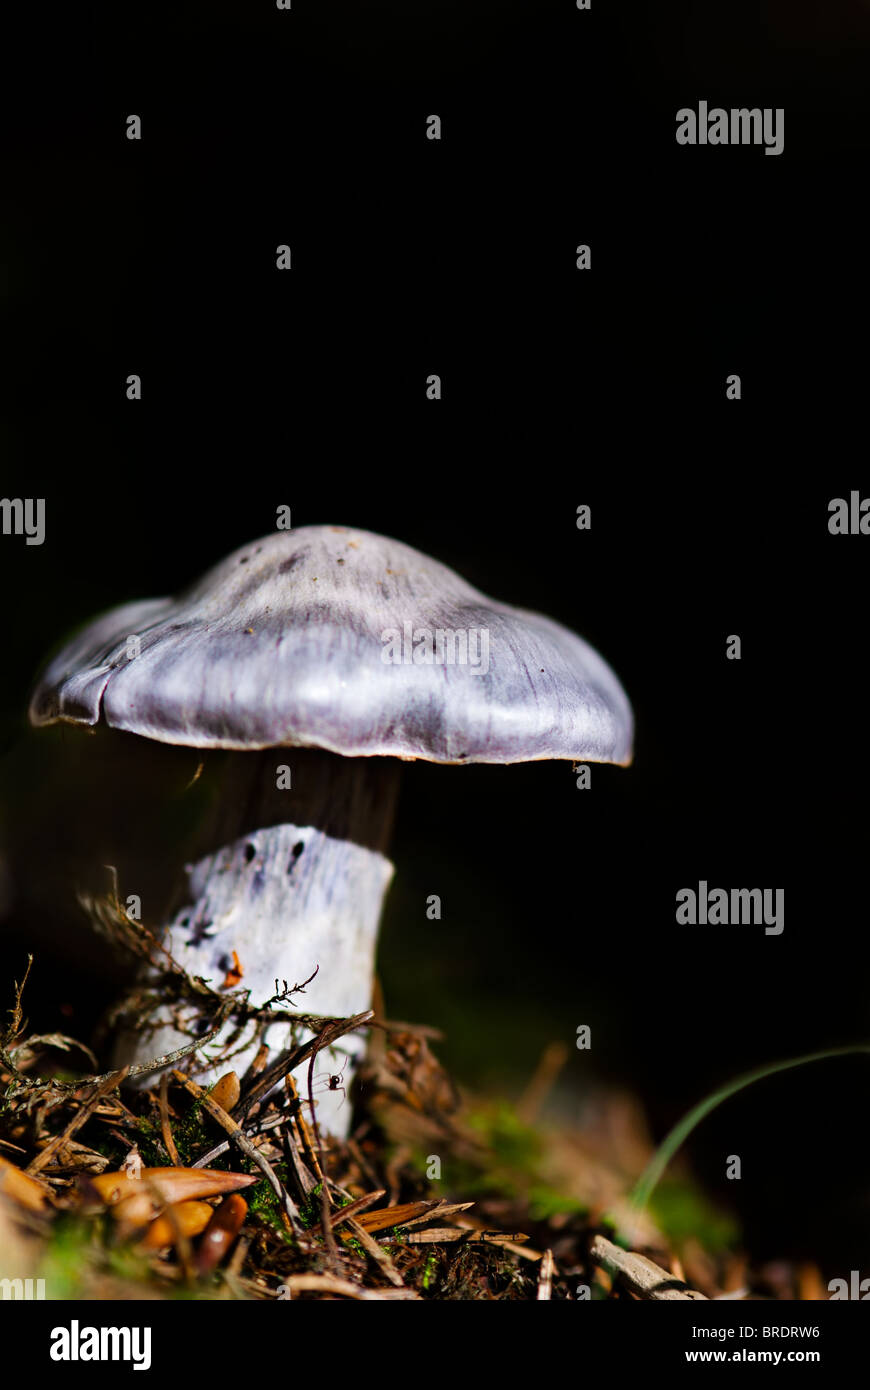 Poisonous mushroom in forest Stock Photo